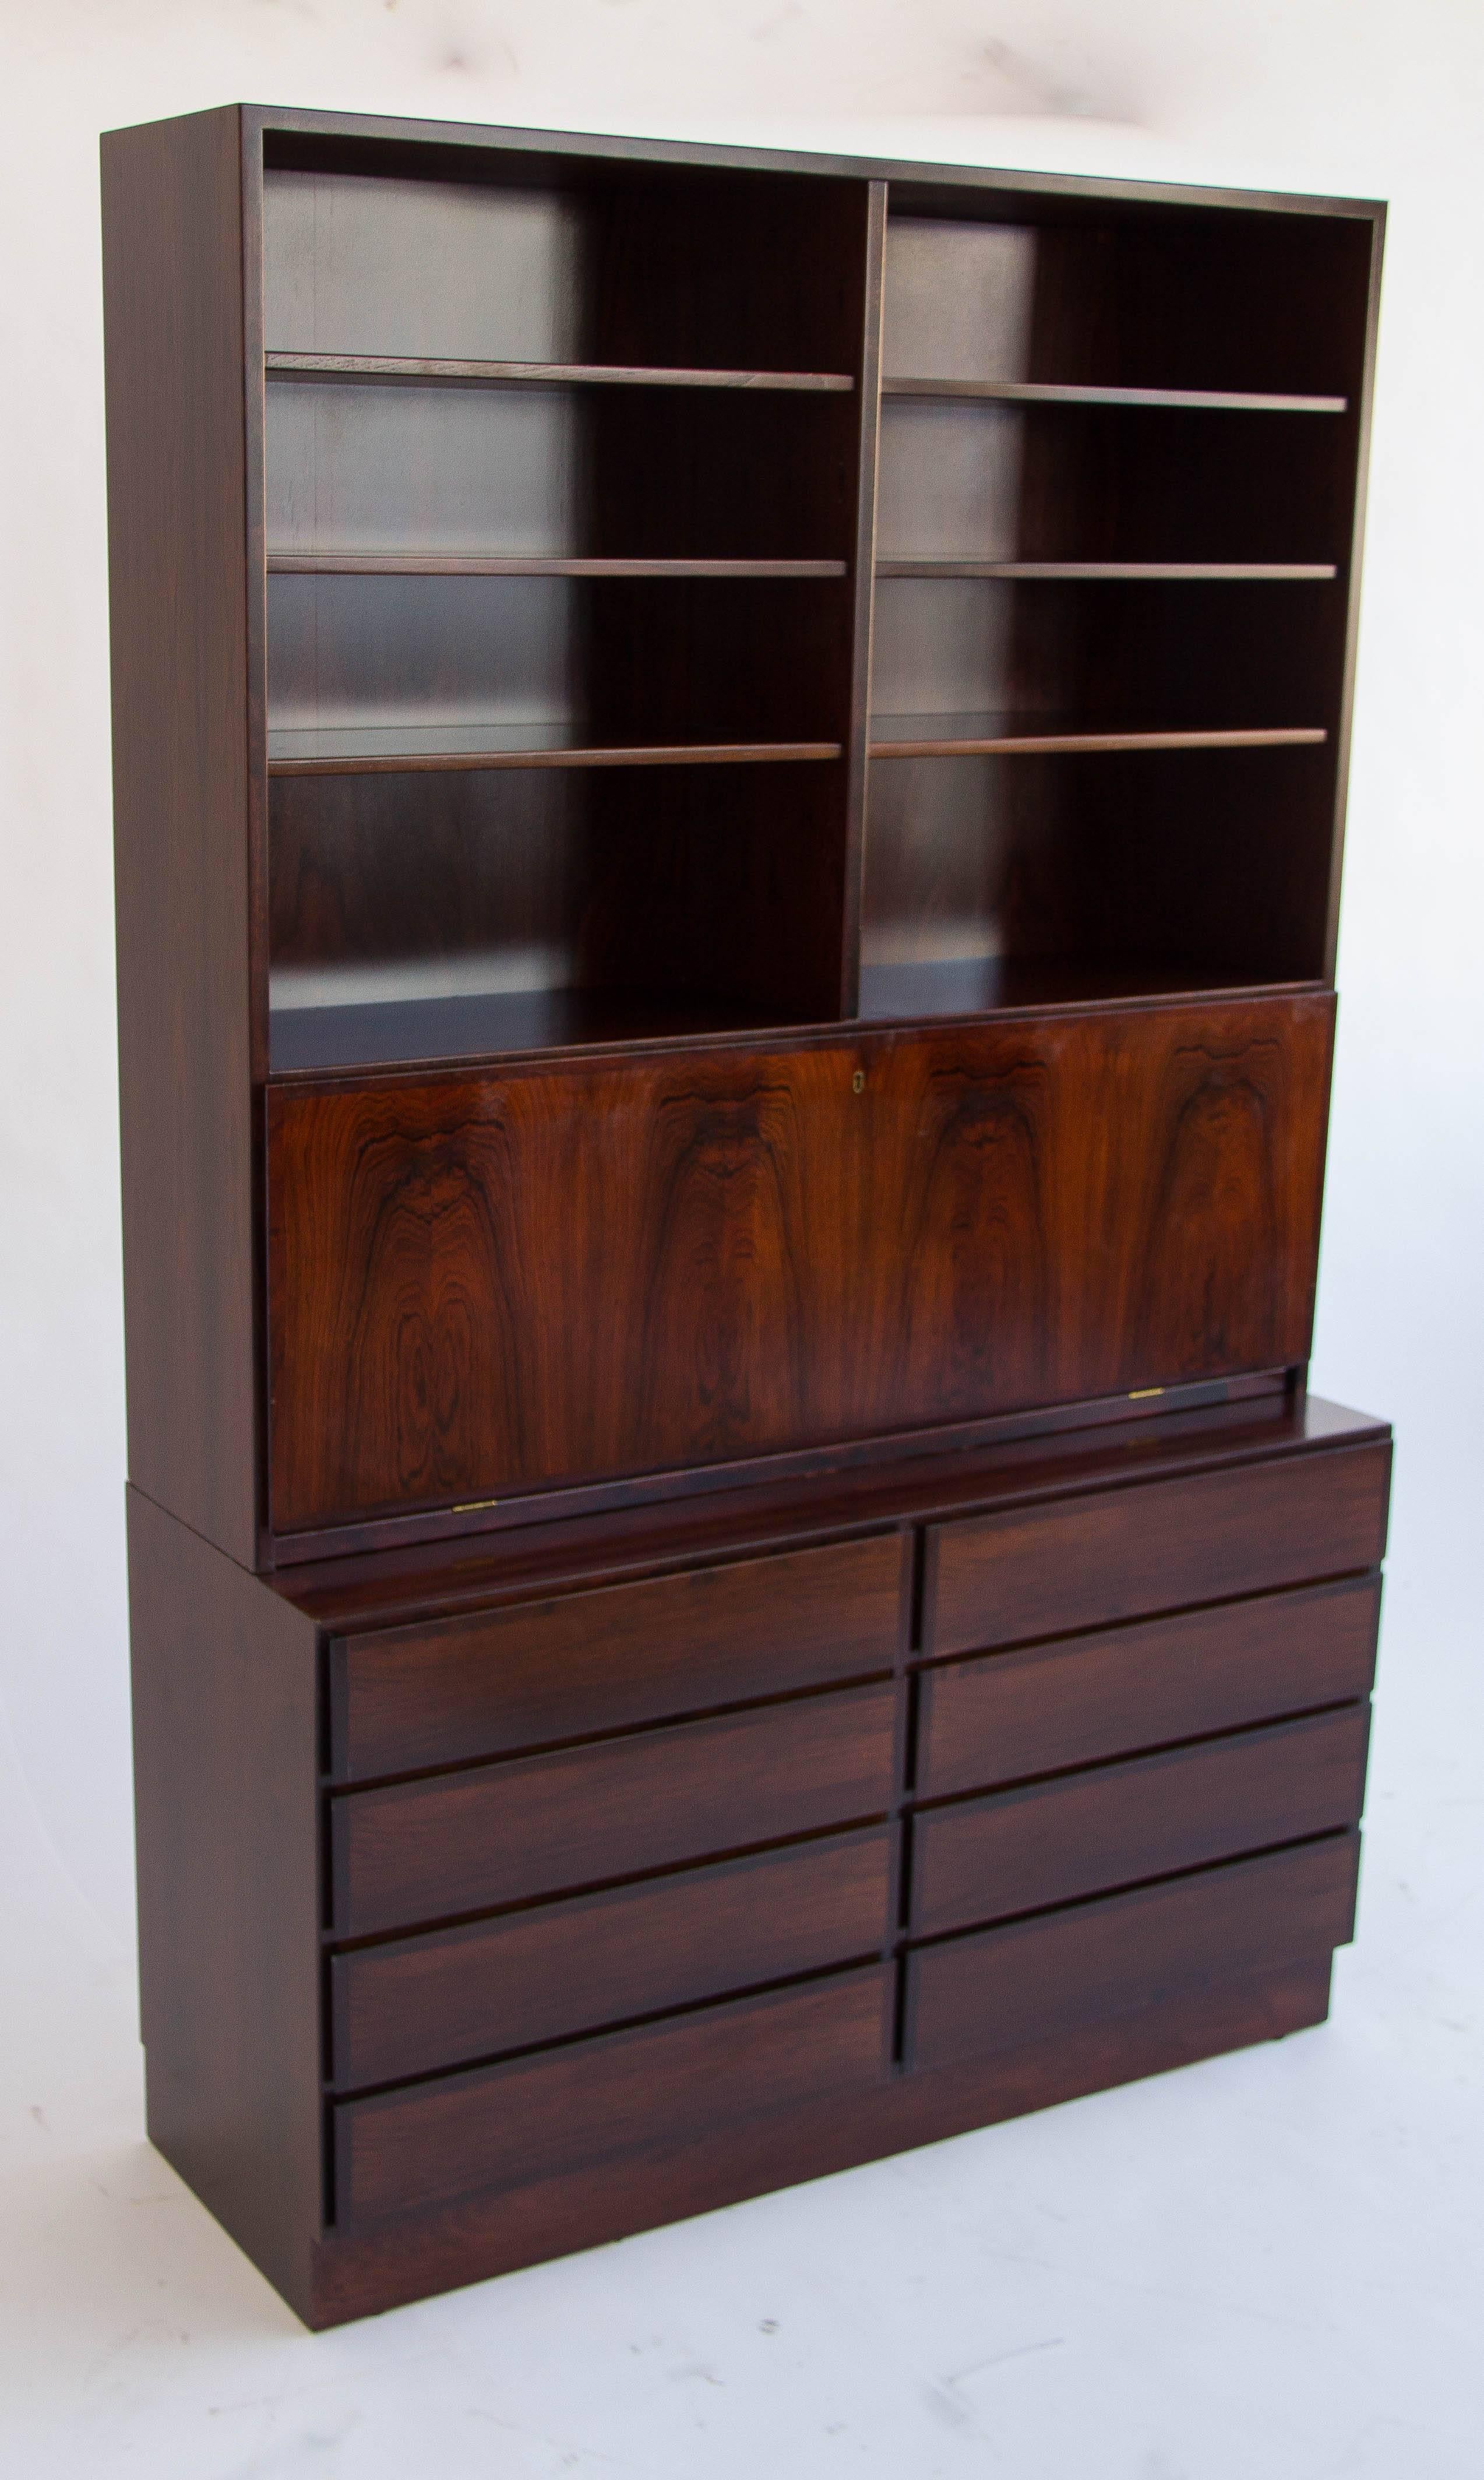 This is an incredible rosewood desk by Gunni Oman for Oman Jun made in Denmark. The bottom half is comprised of eight drawers with a birch interior. The top portion features a locking fold-down secretary desk. Also within that compartment are seven